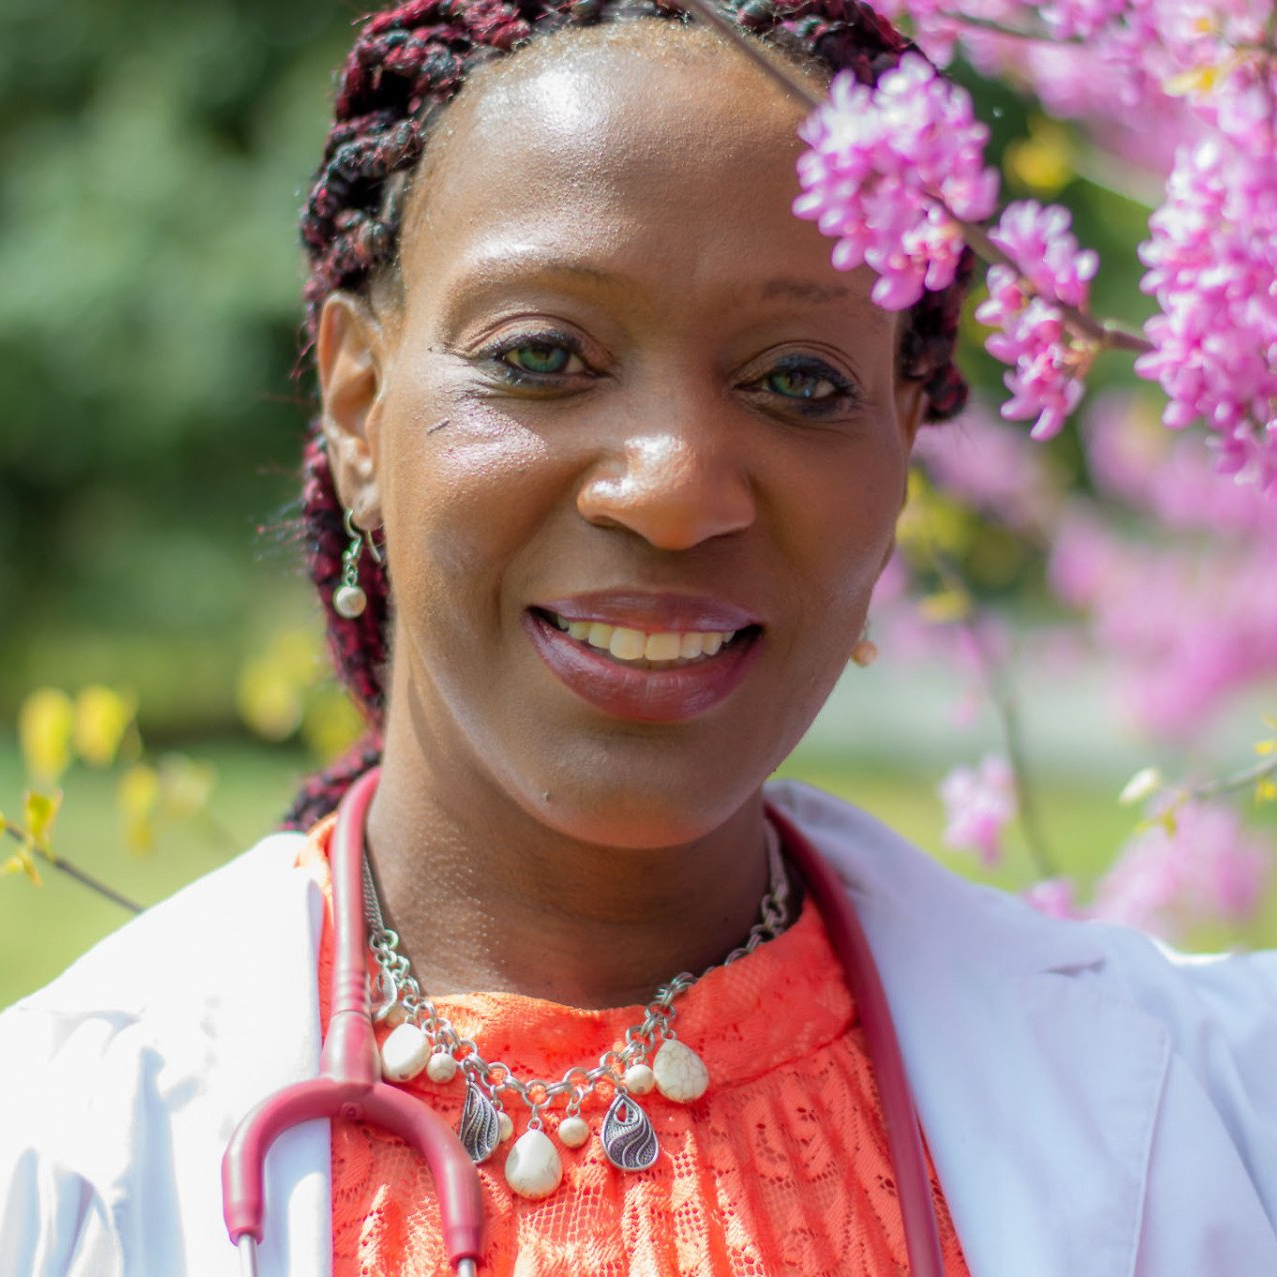 Nurse Linda A. Gilliam-Johnson standing amidst purple flowers with a stethoscope in an orange dress and white lab coat